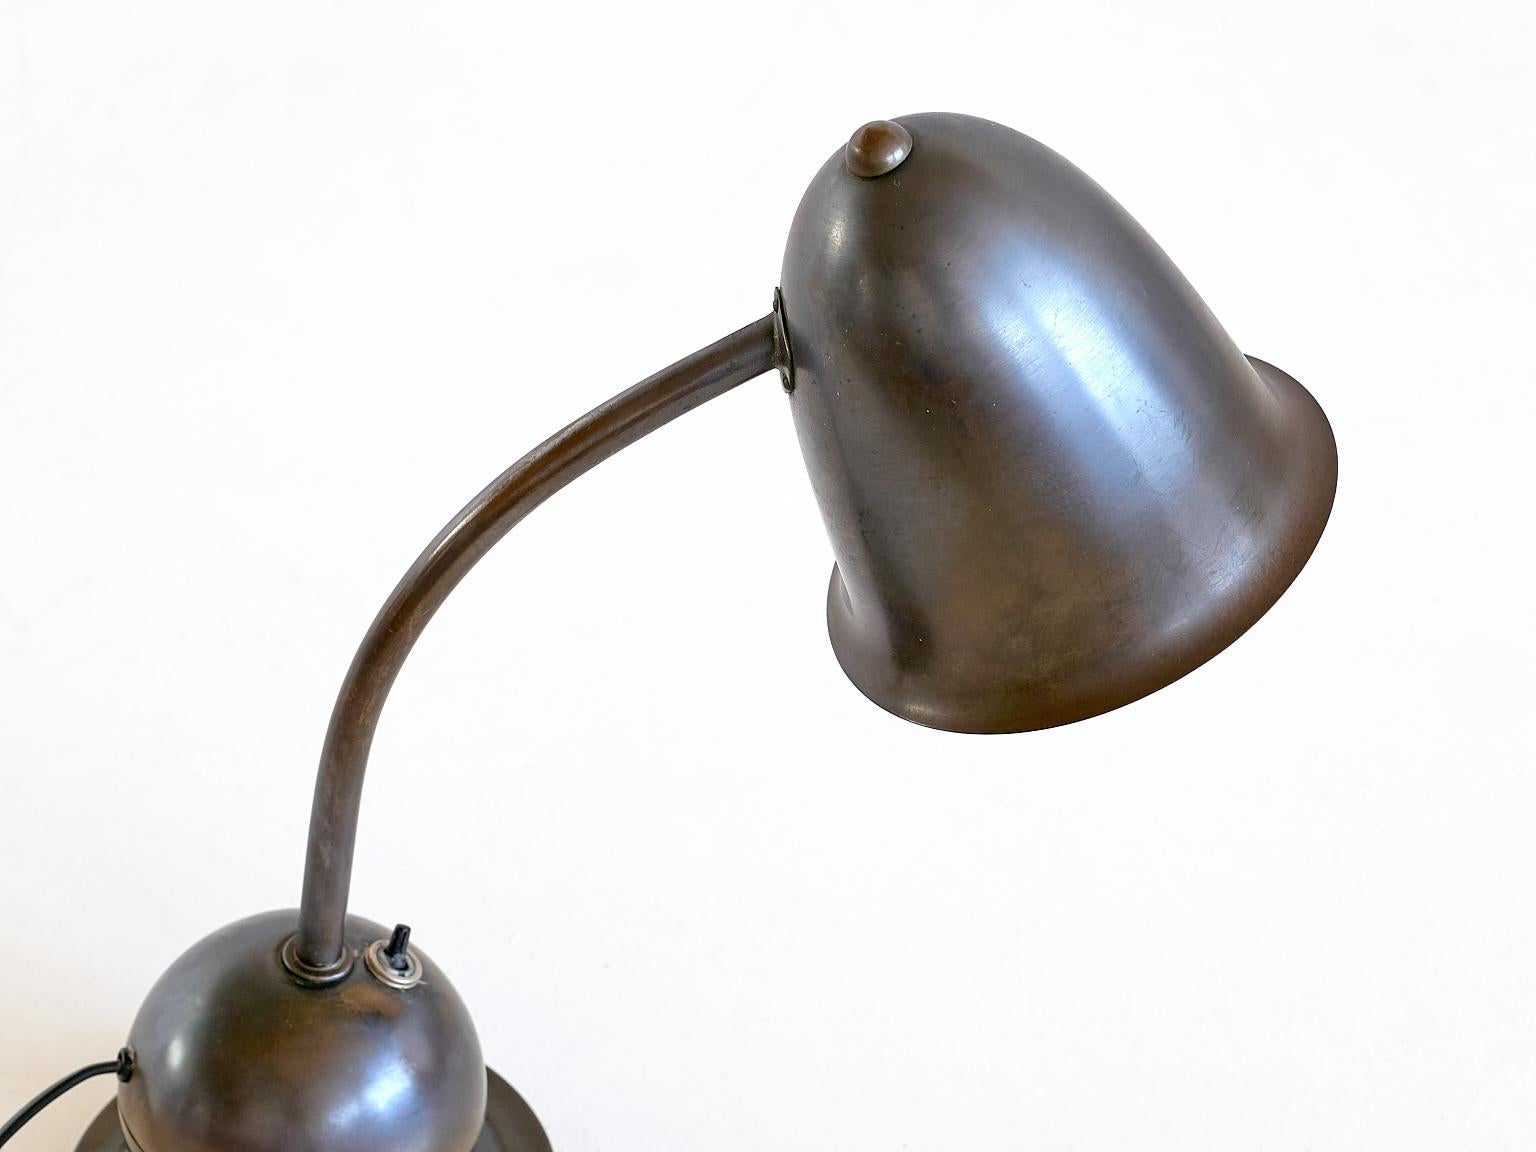 Mid-20th Century KMD Daalderop Art Deco Counterweight Desk Lamp with Bell Shade, 1935